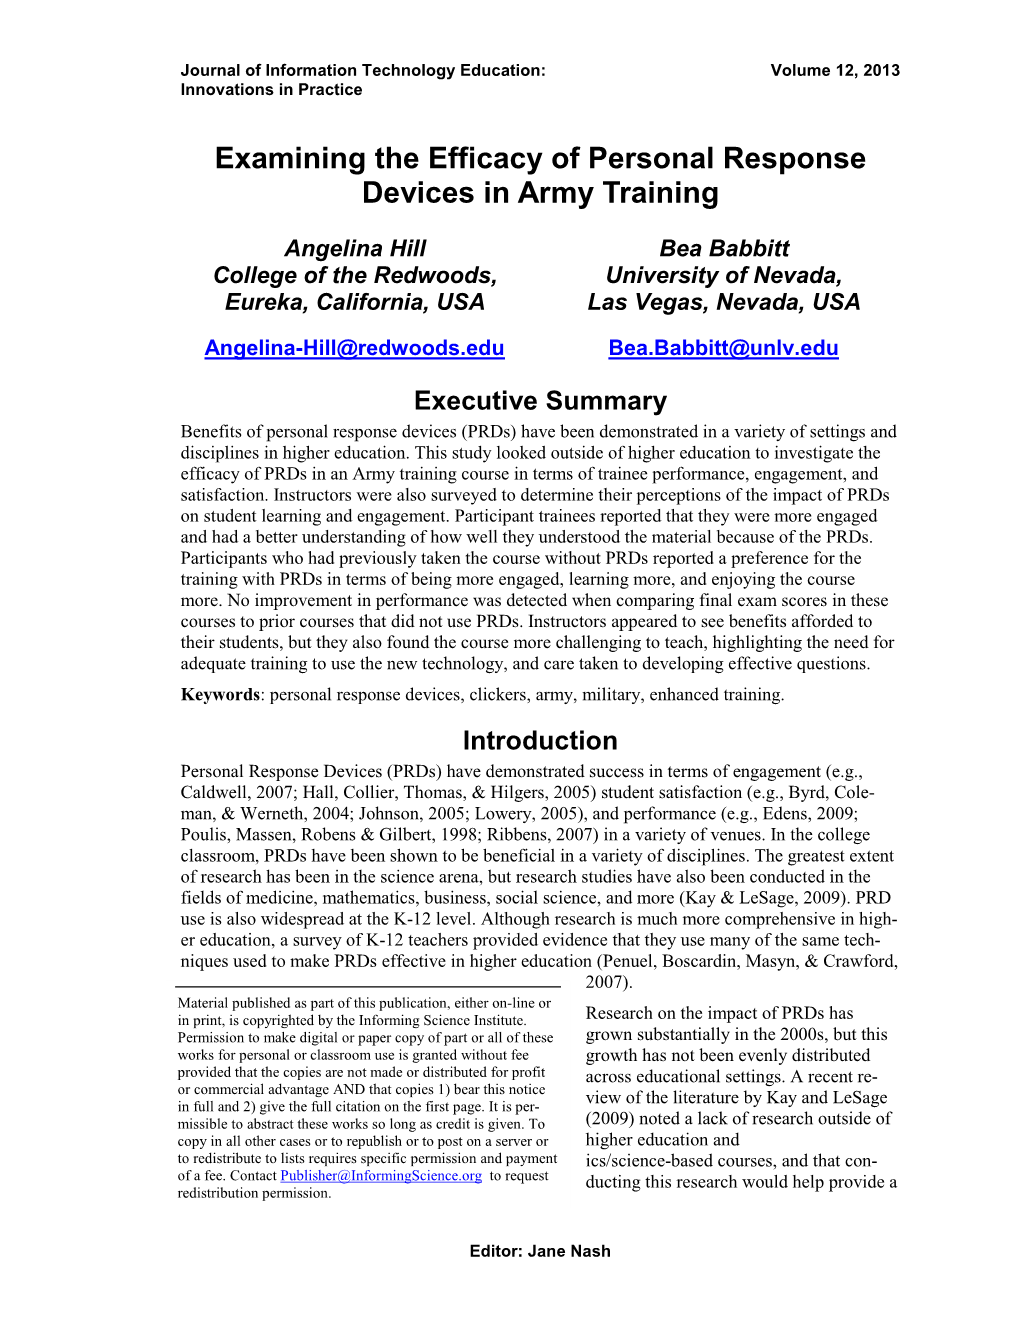 Examining the Efficacy of Personal Response Devices in Army Training